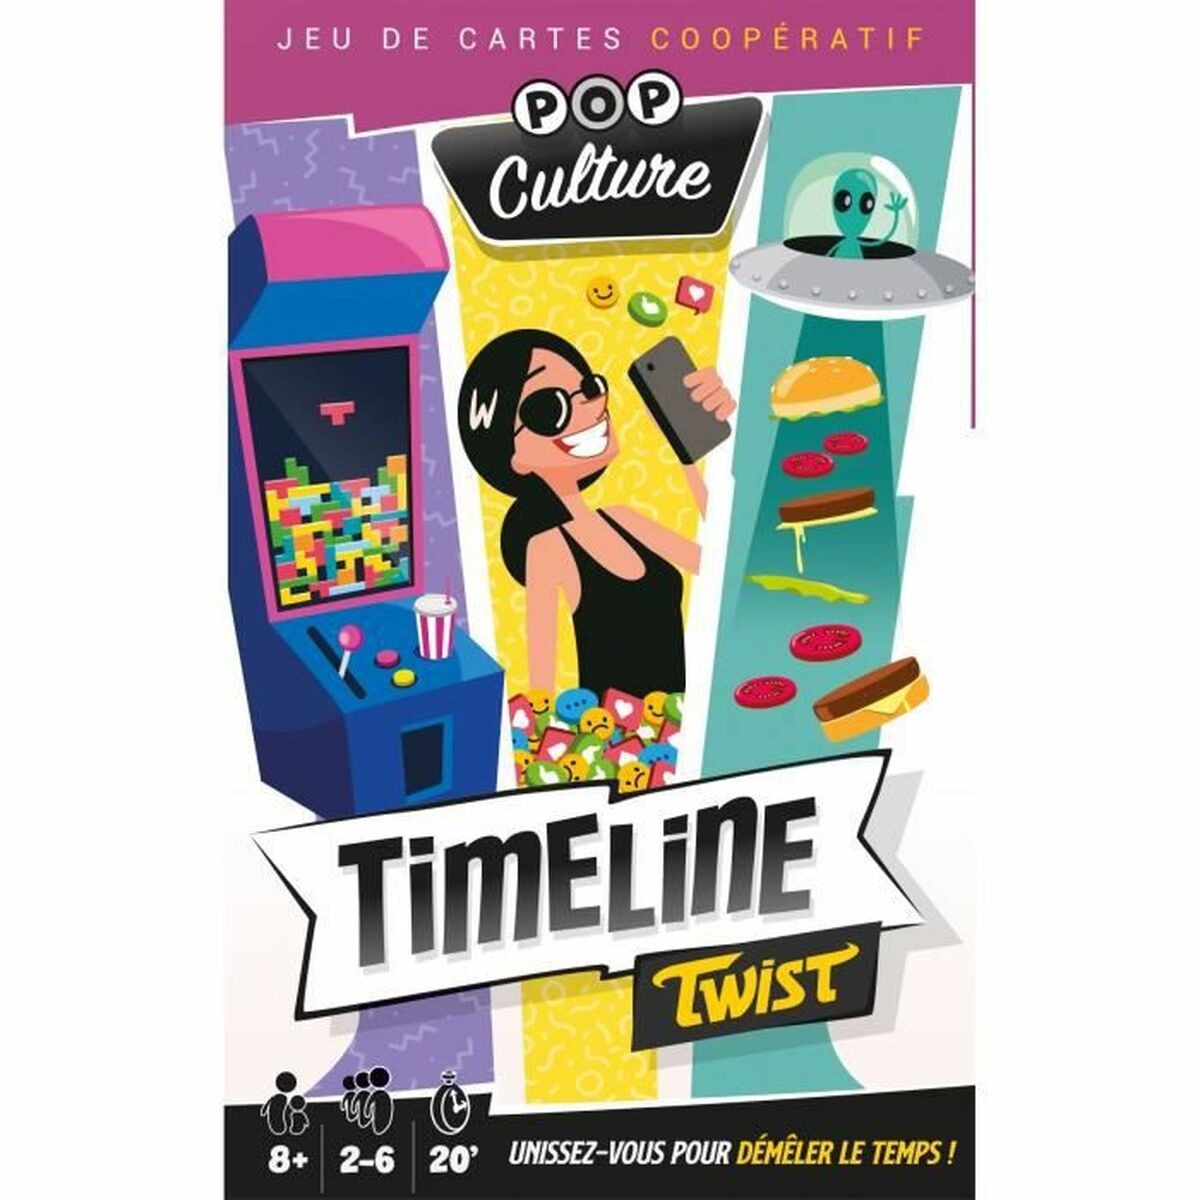 Board game Asmodee Timeline Twist Pop Culture (French) - Little Baby Shop